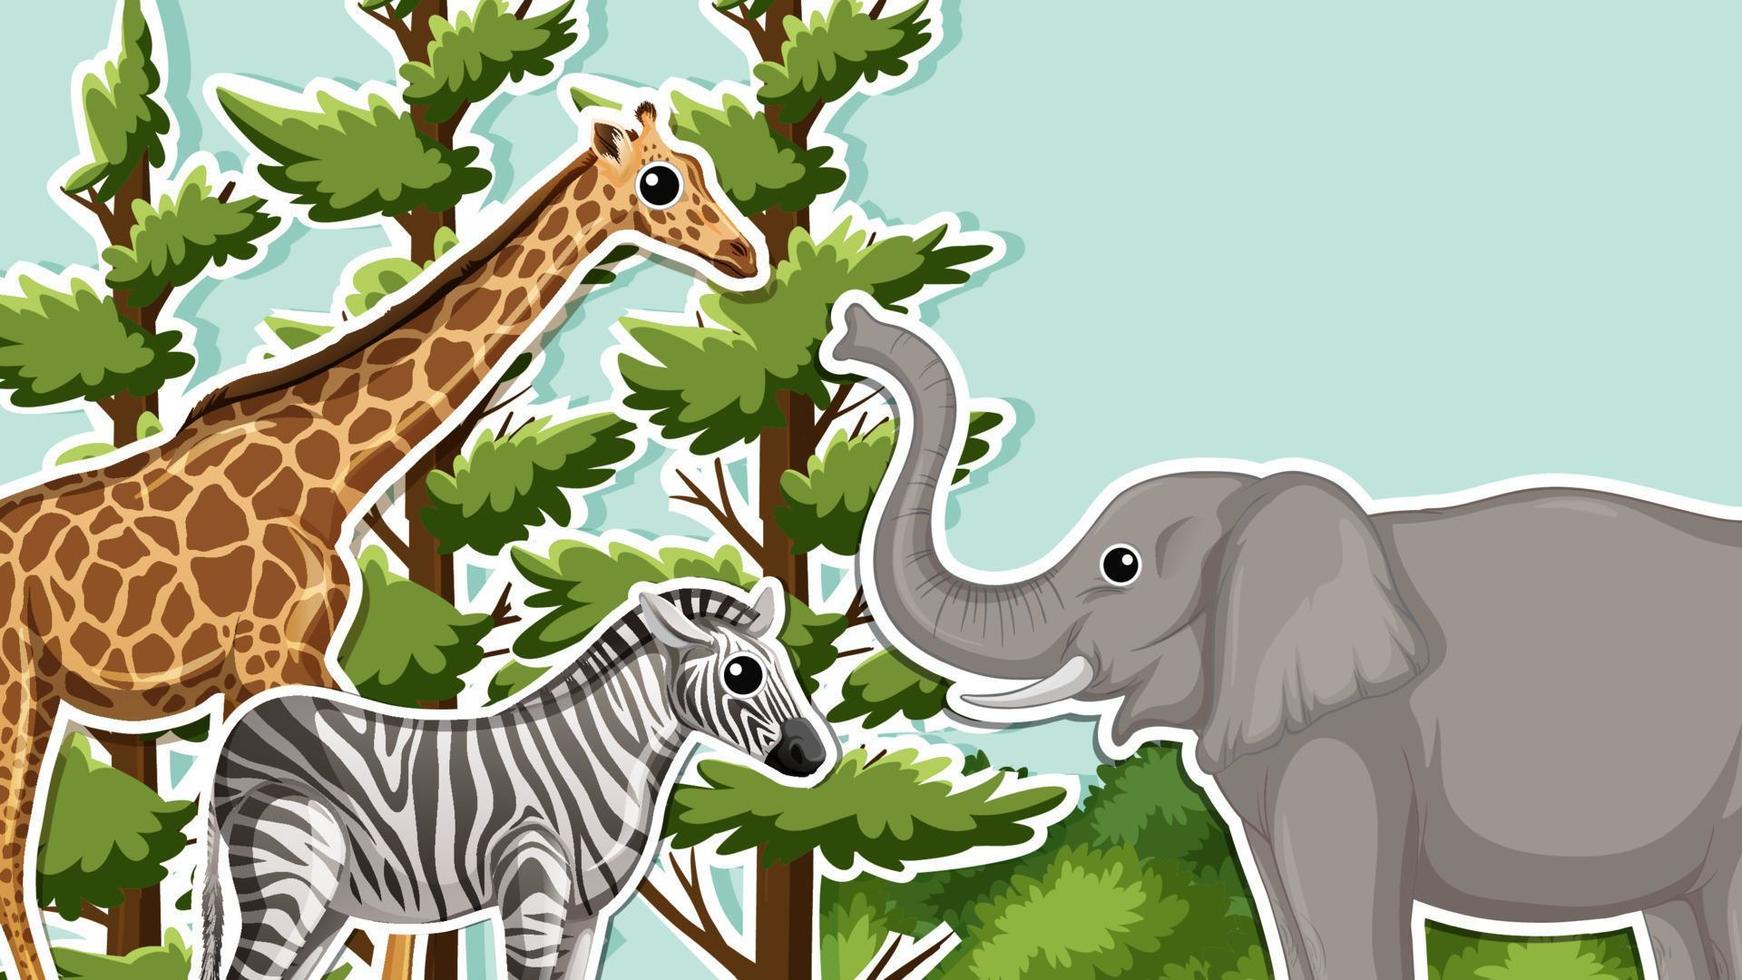 Background of wild animals in the forest vector